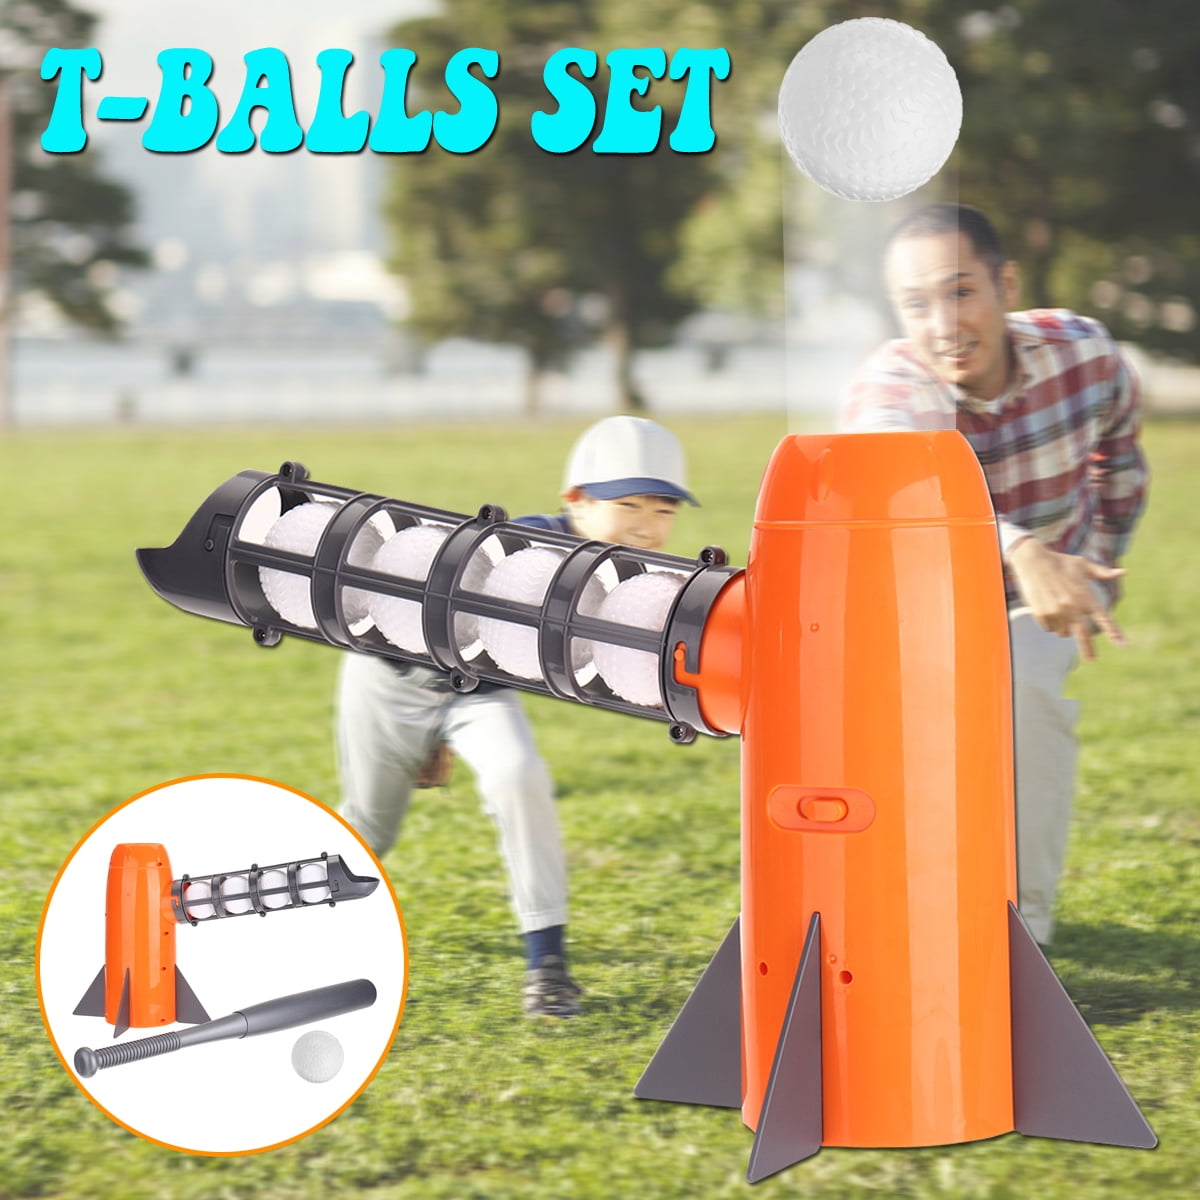 Kids Baseball Toys T Balls Pitcher Set Automatic Pitching Machine Boys Exercise Training Sport Yard Game Indoor Outdoor Birthday Gift for 5 6 7 Year Old Toddler Child Color May Vary Ball Launcher 